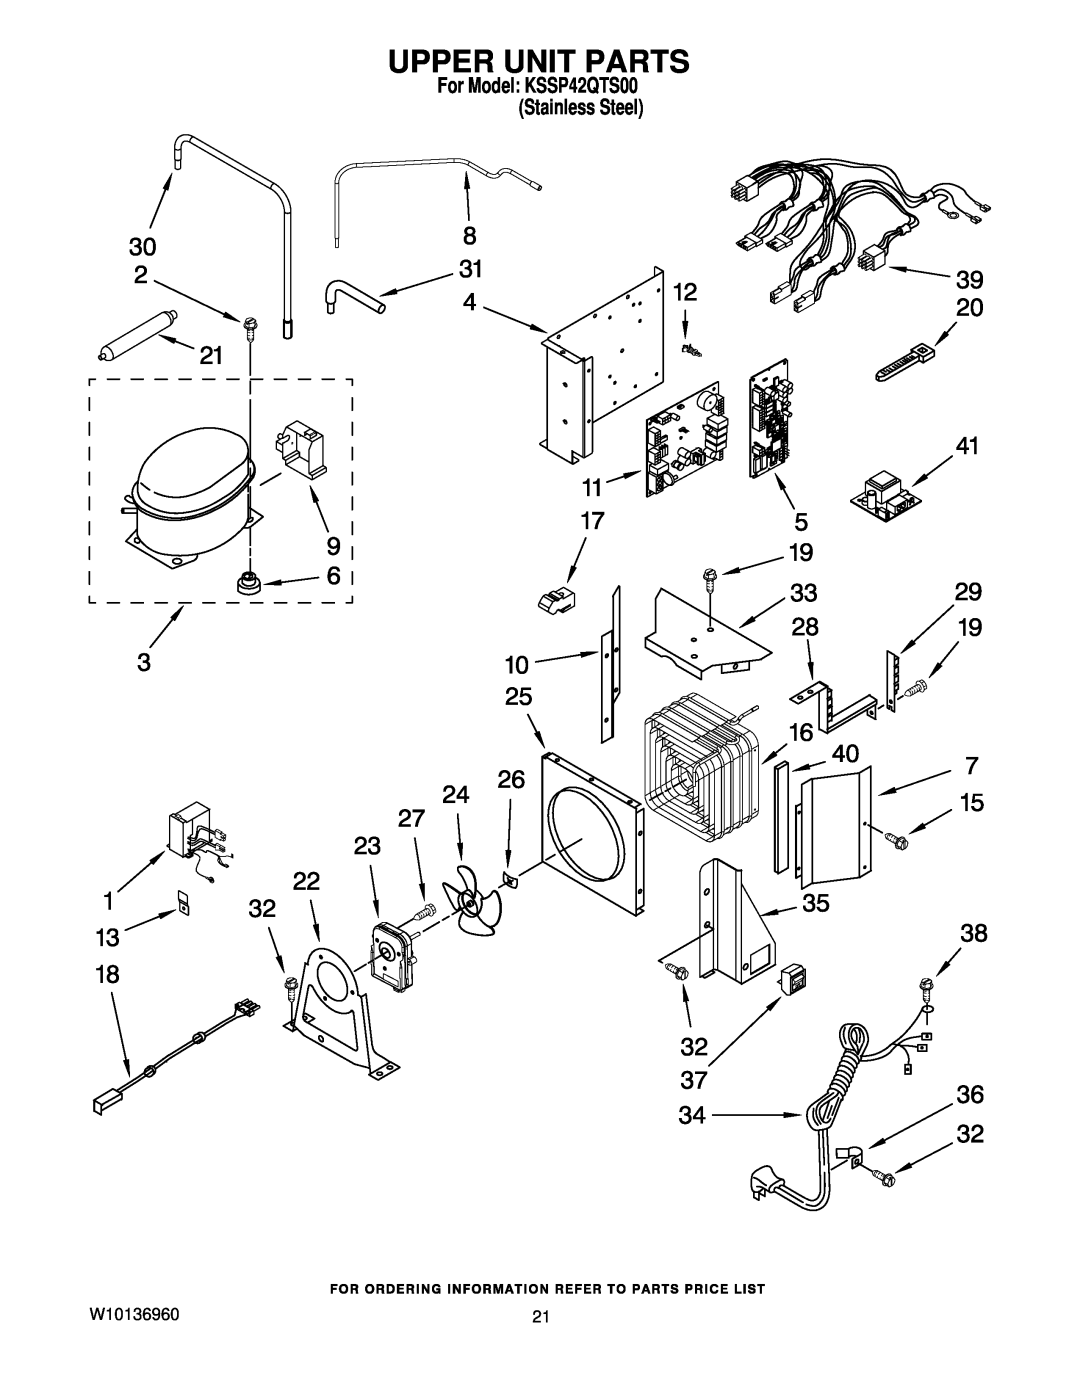 KitchenAid manual Upper Unit Parts, W10136960, For Model KSSP42QTS00 Stainless Steel 